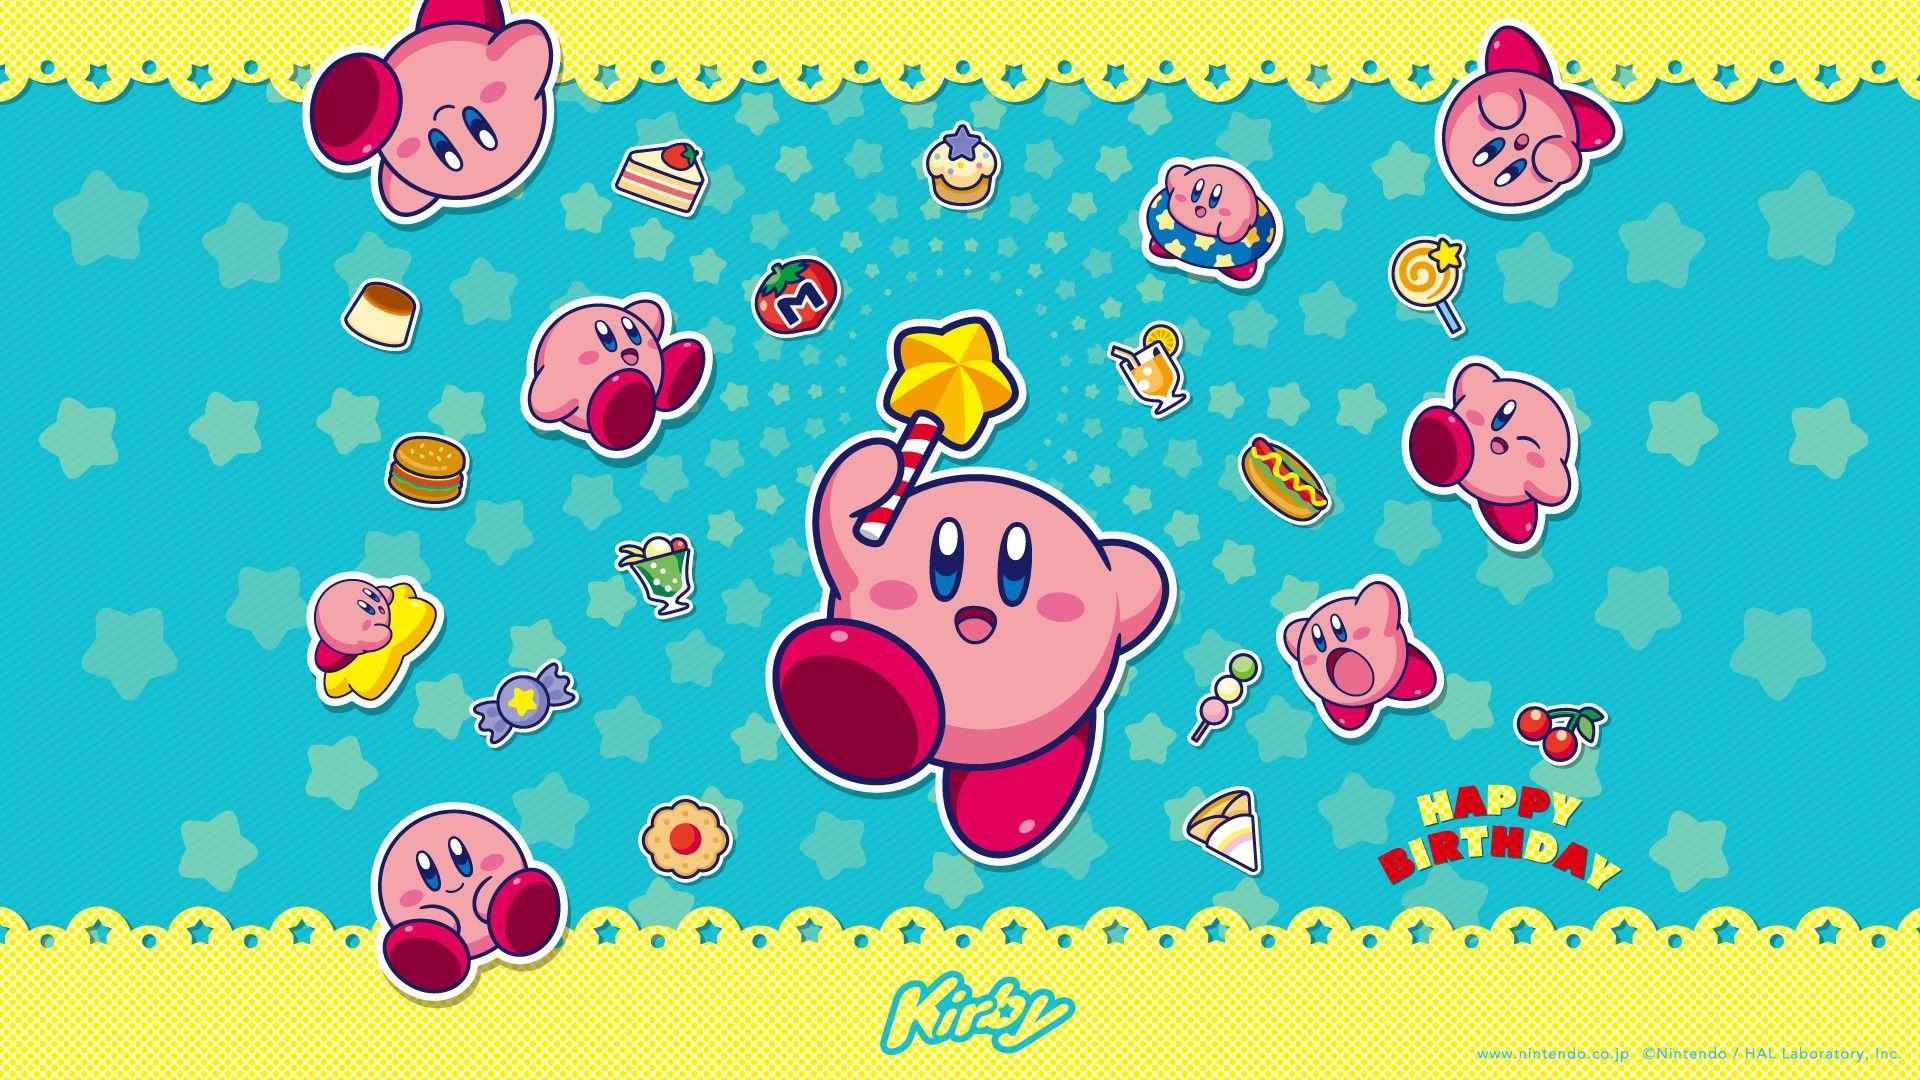 Kirby Wallpapers - Top Free Kirby Backgrounds ...